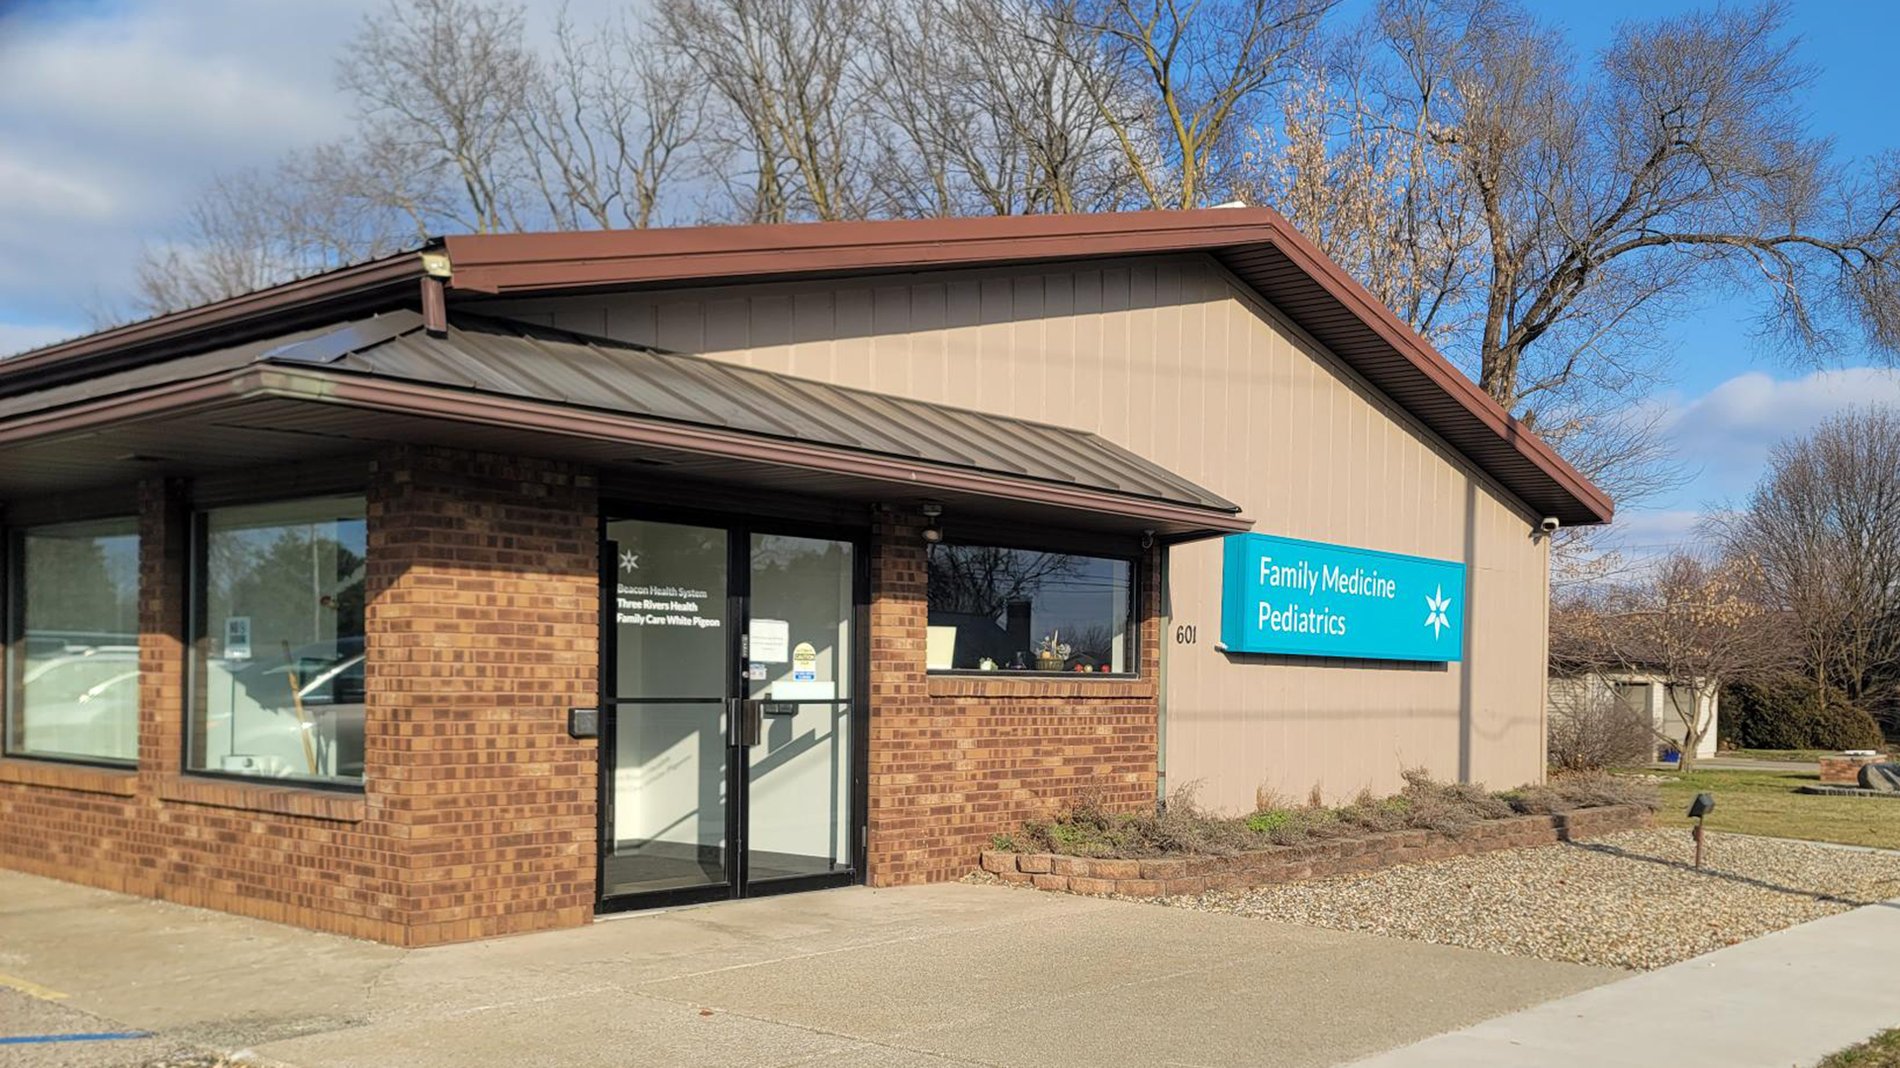 A teal sign stands in the front of the Beacon Three Rivers Health White Pigeon building.  The entrance to Beacon Three Rivers Health White Pigeon with a sign that says "Family Medicine Pediatrics".